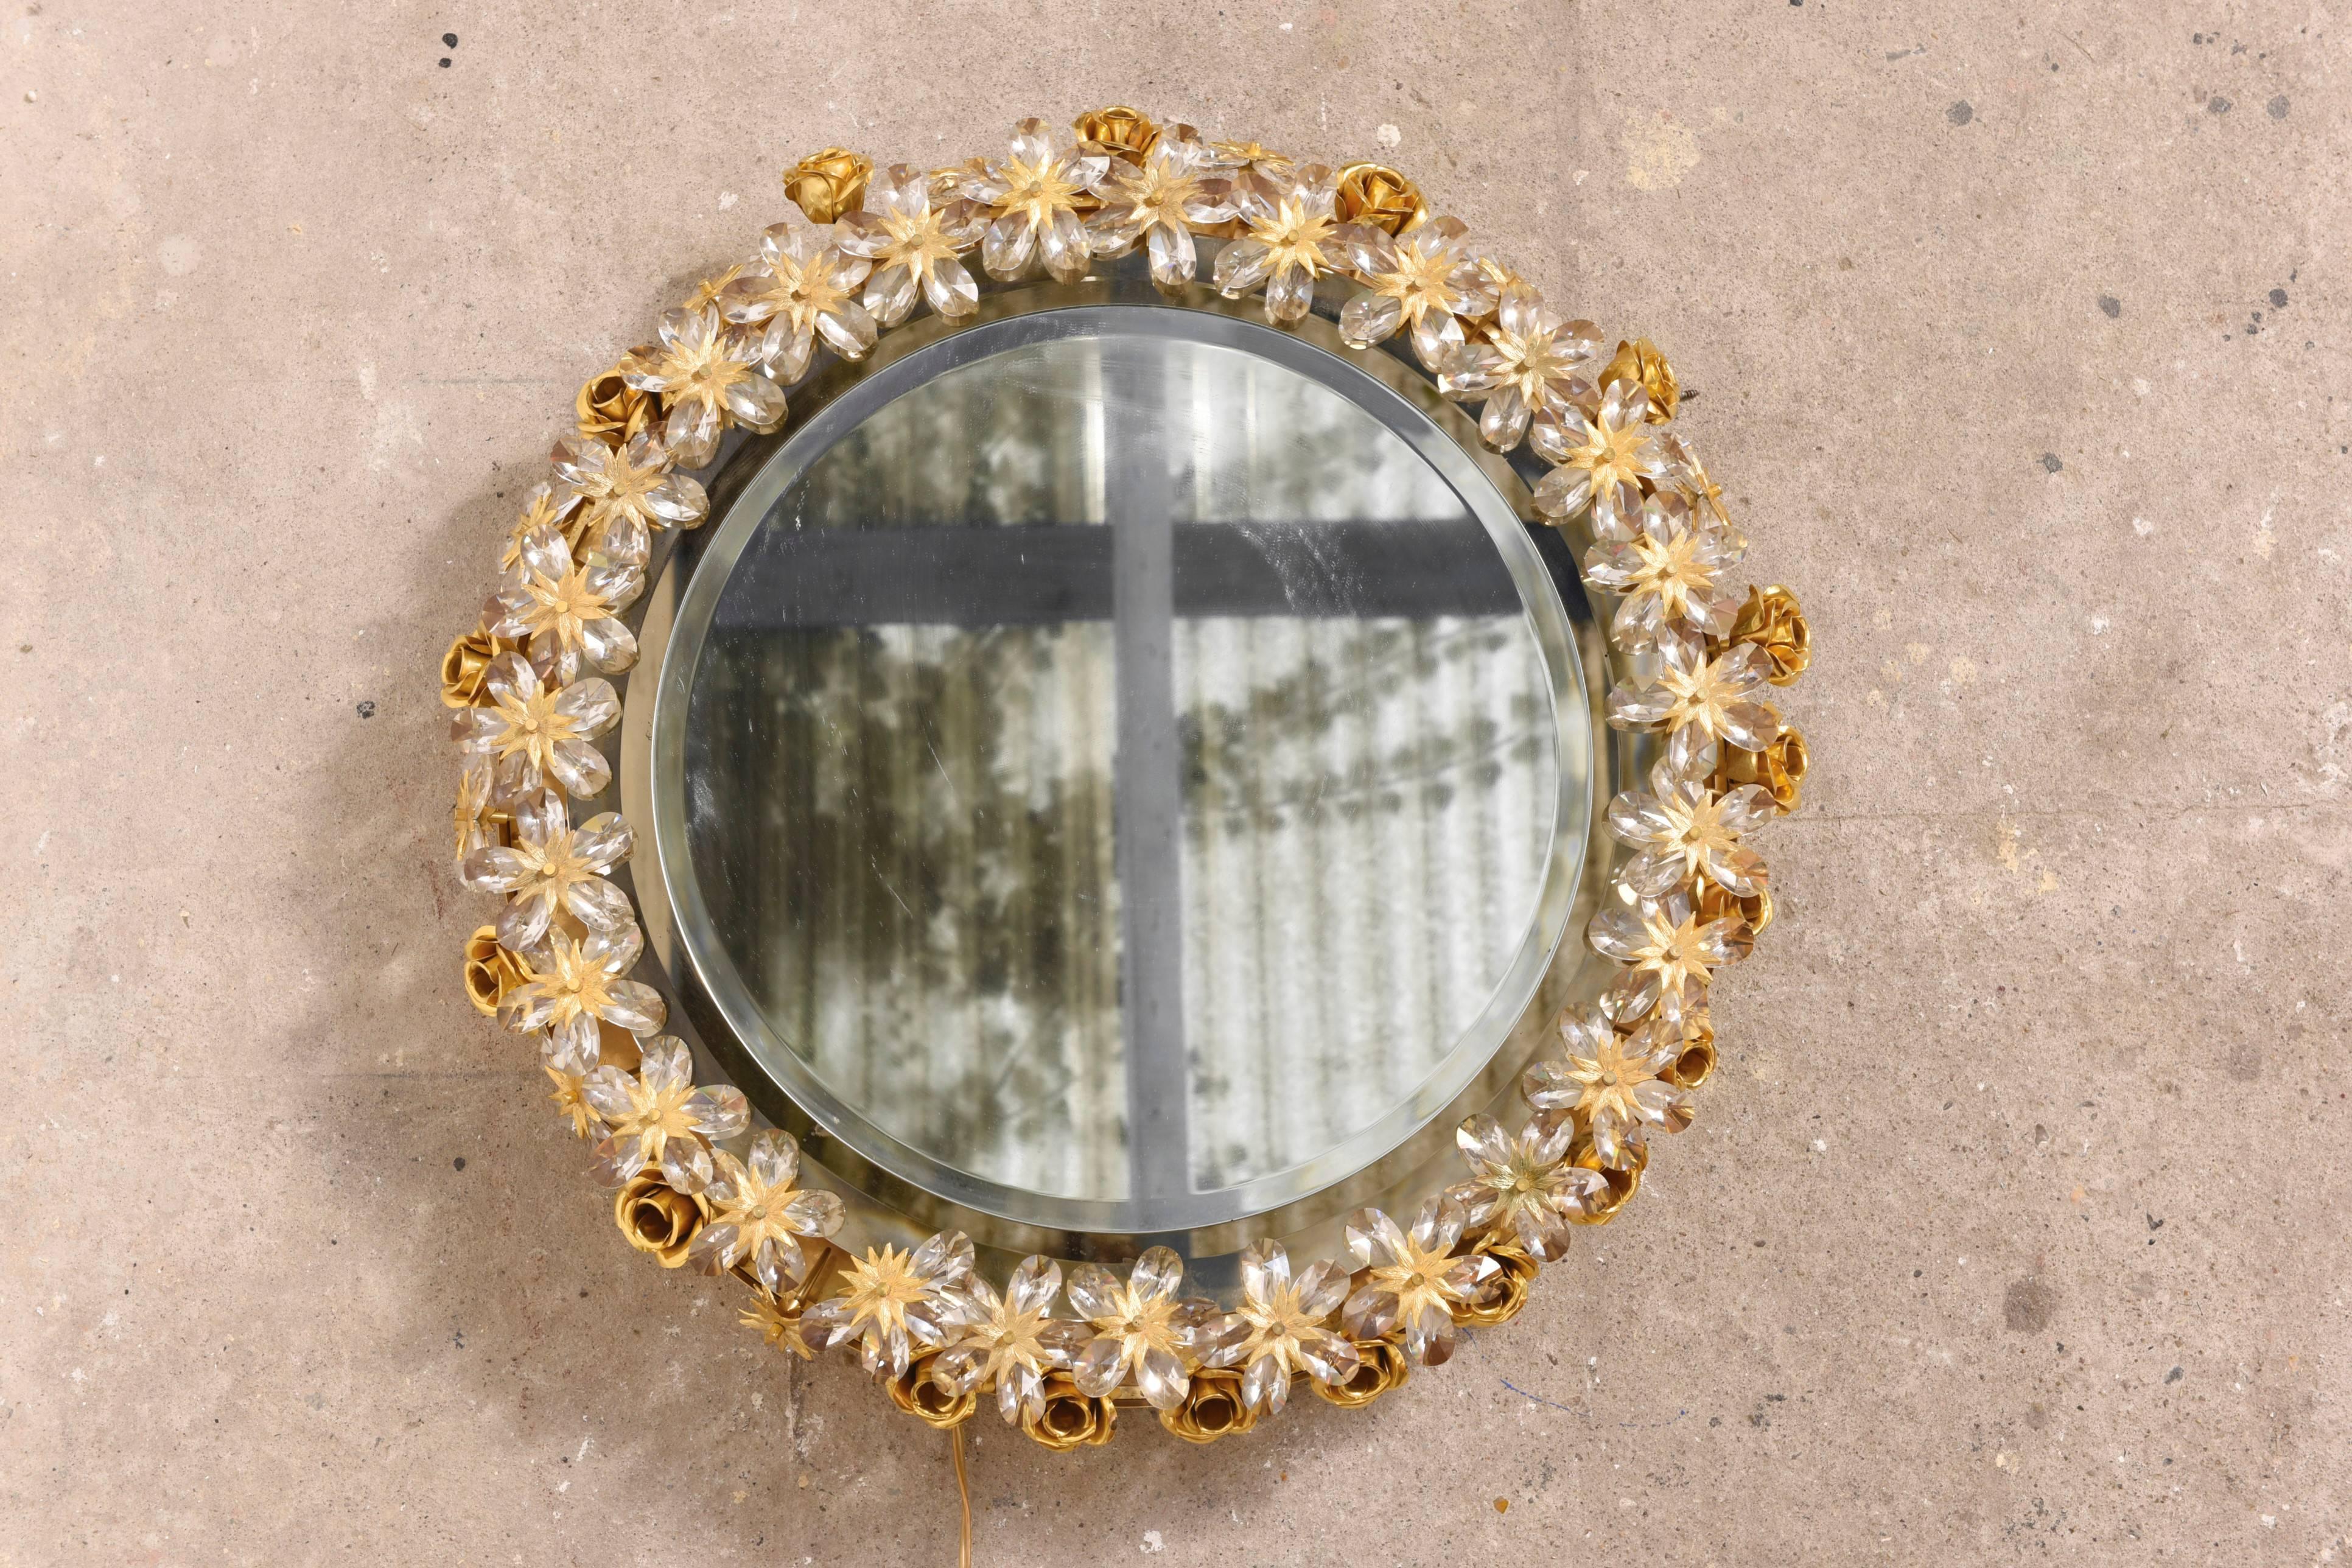 Beautiful brass illuminated mirror Made by Palwa, Germany with original label. The large individual flower has jewel-like faceted crystals set in a brass circle enclosing the mirror with one row of gilded roses. The lighting through the crystals